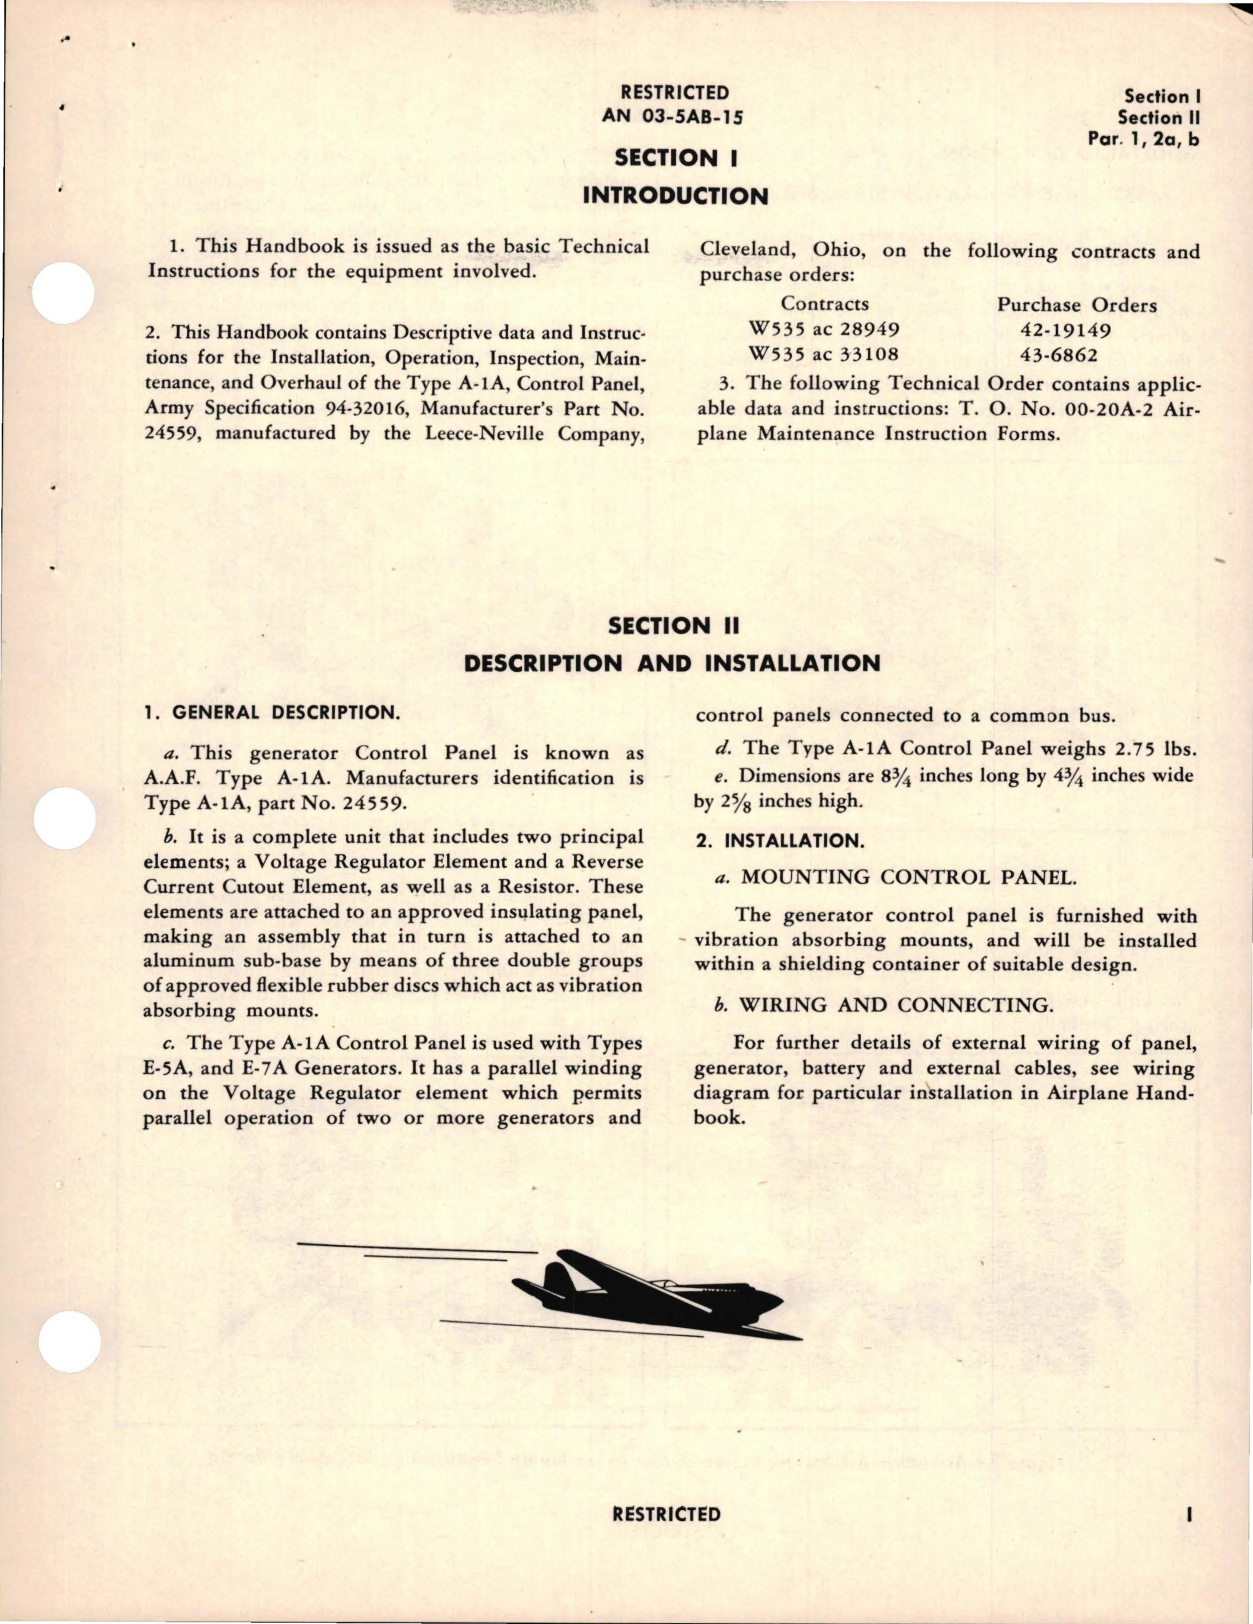 Sample page 7 from AirCorps Library document: Instructions with Parts Catalog for Generator Control Panel - Type A-1A